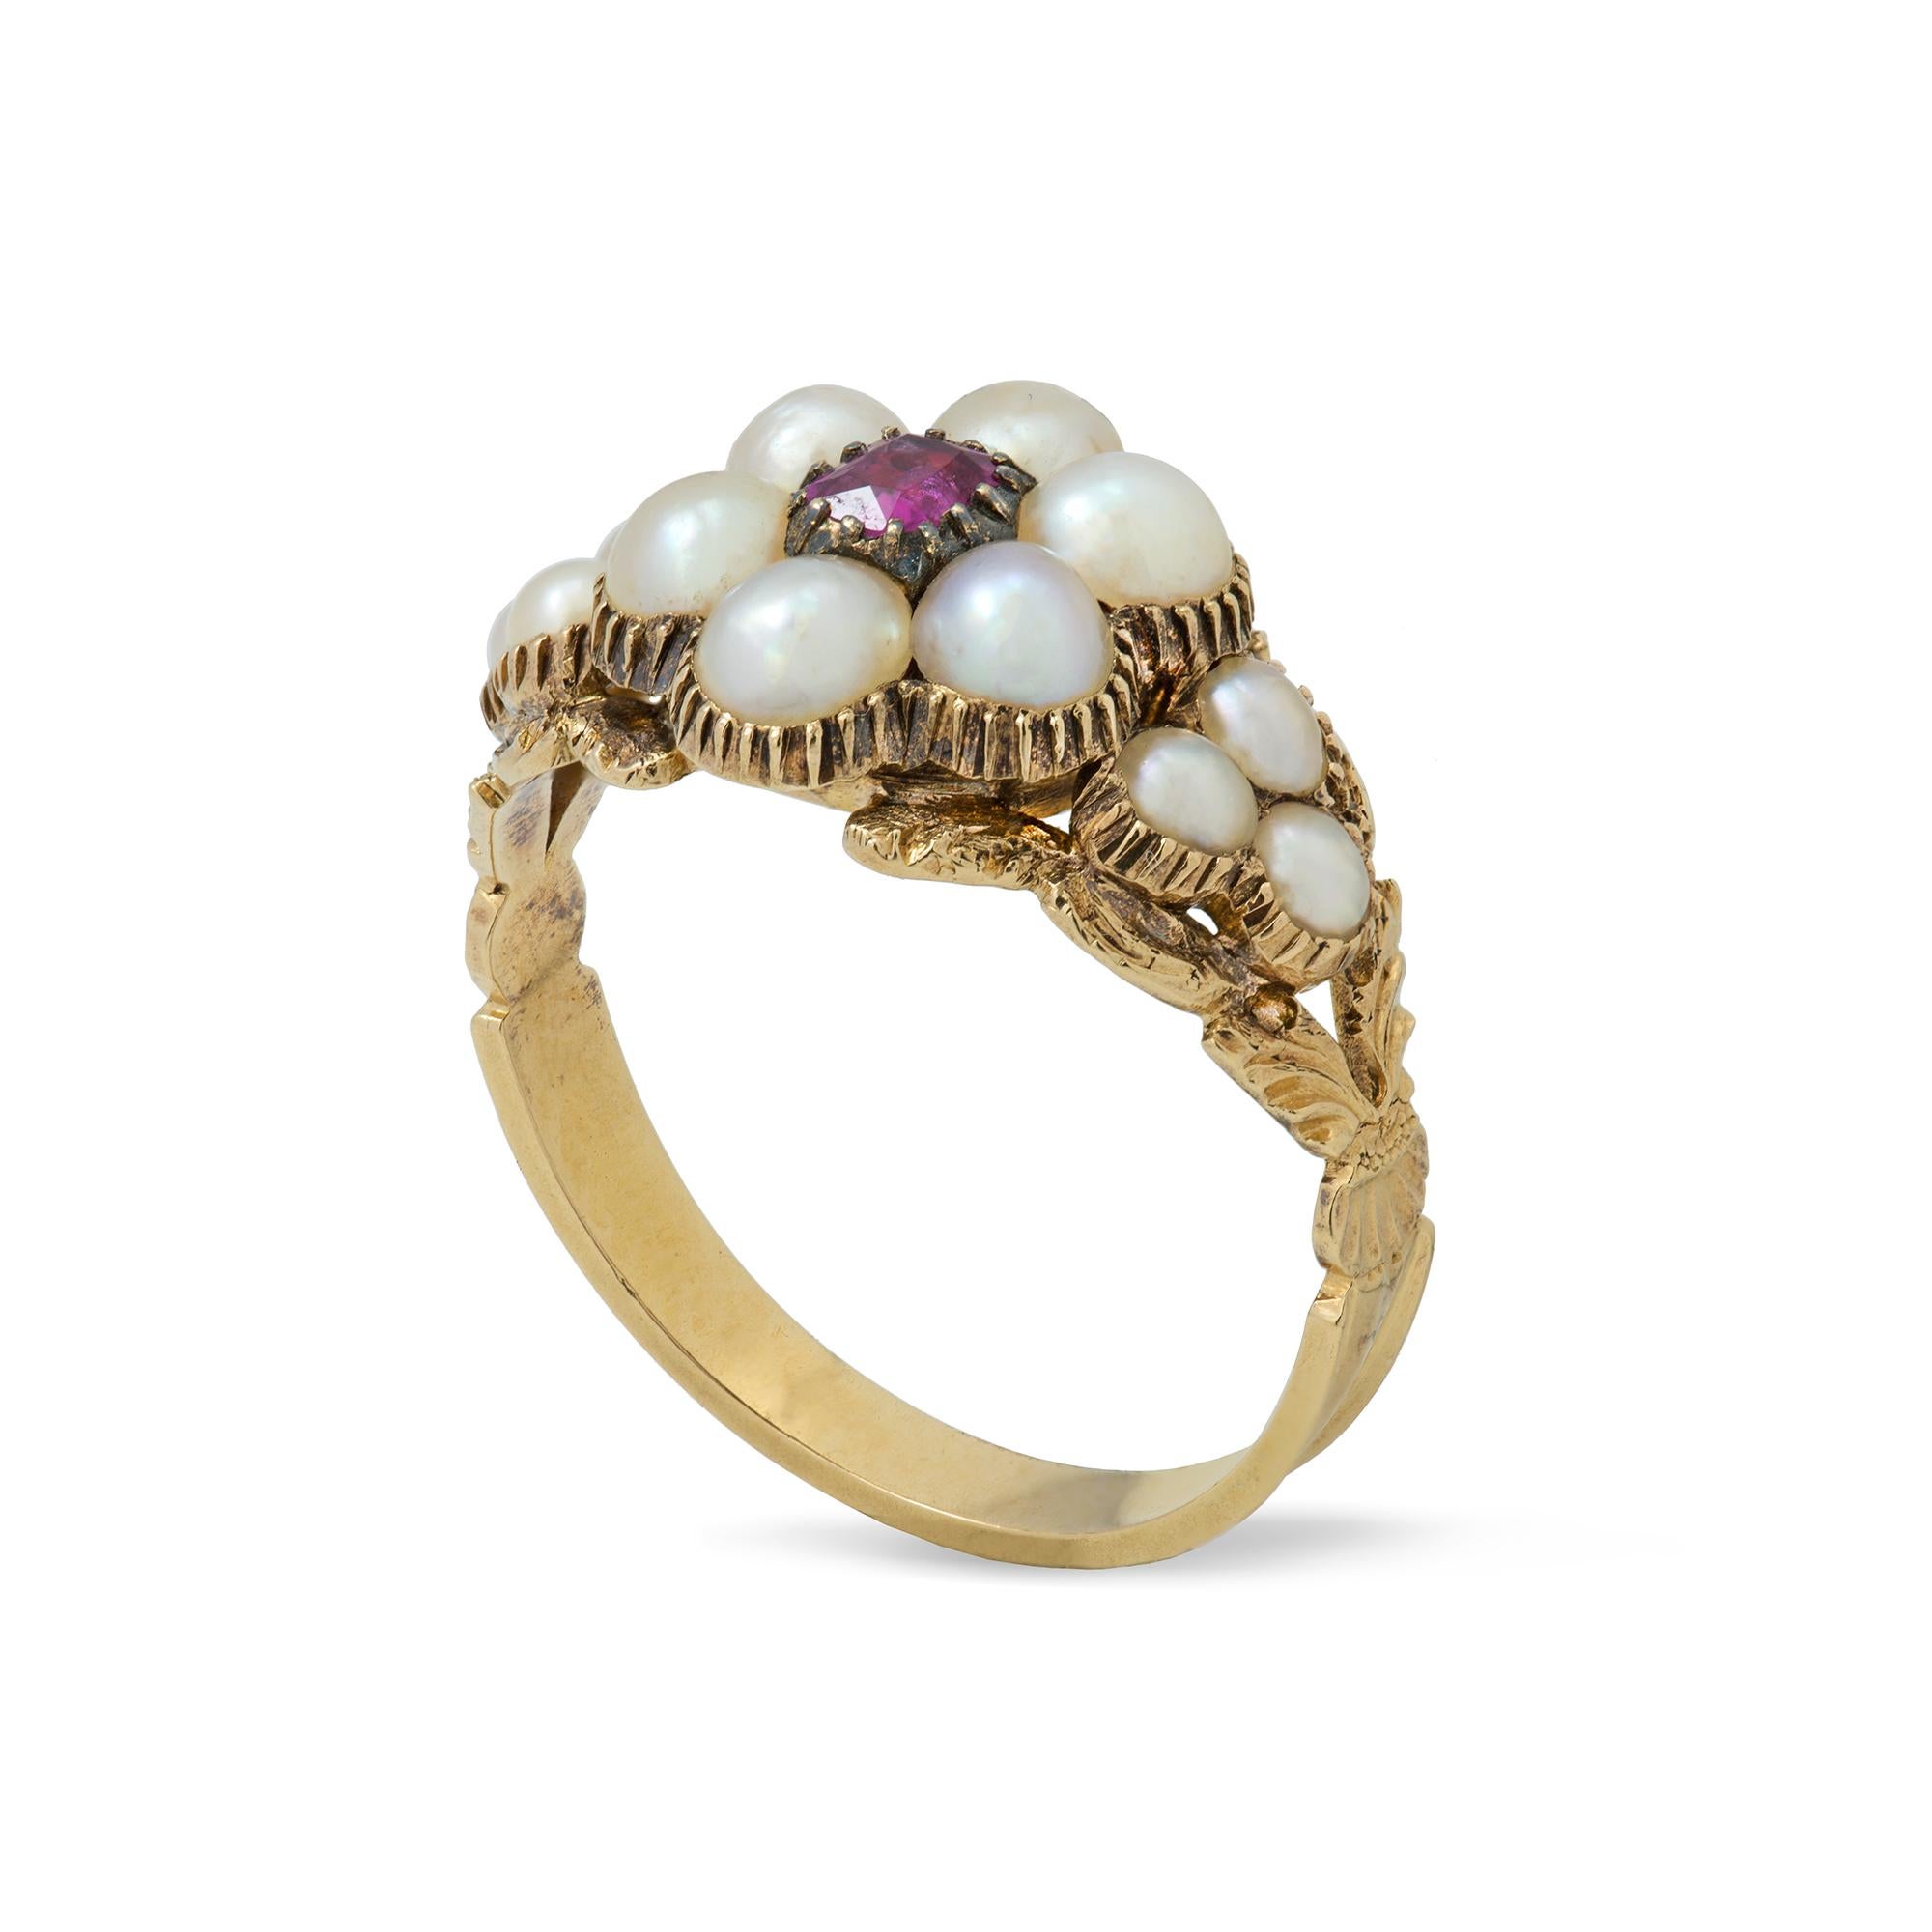 An early Victorian pearl and ruby cluster ring, the ring set with a  cushion-cut ruby, surrounded by six half pearls measuring approximately 3.7mm, flanked by pearl trefoils, all set to a gold reeded collet, on a gold mount with split foliate